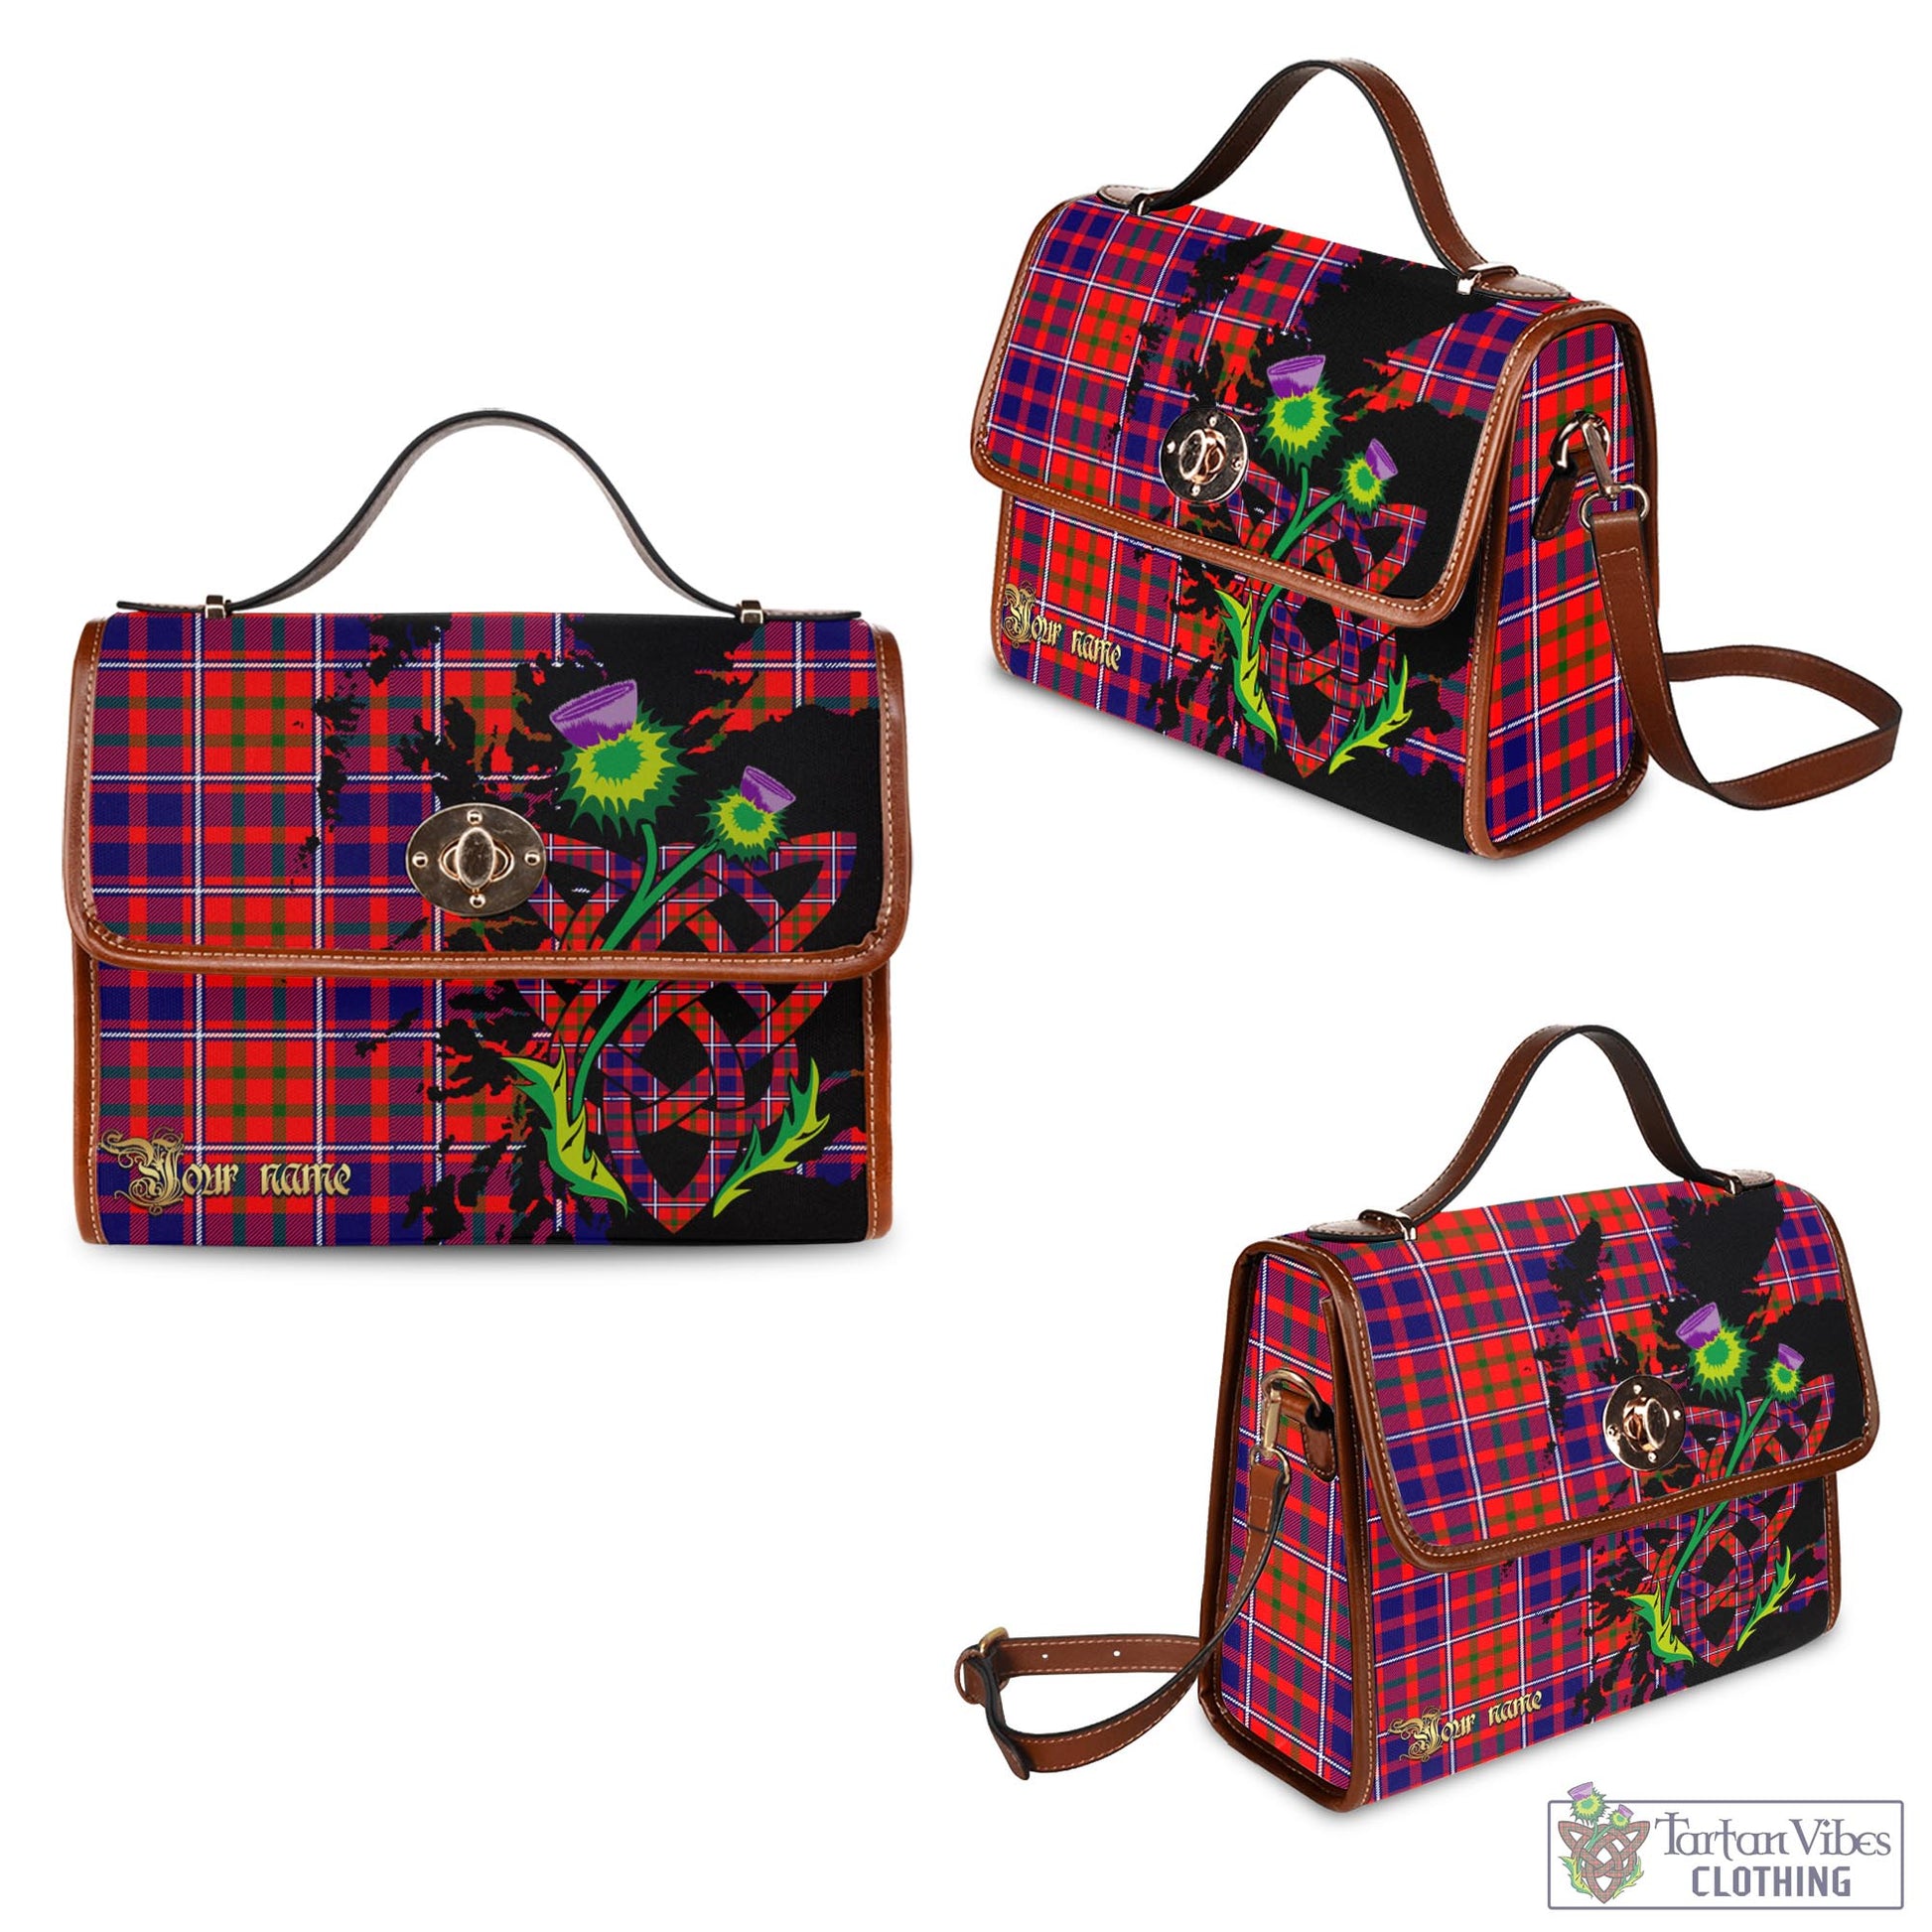 Tartan Vibes Clothing Cameron of Lochiel Modern Tartan Waterproof Canvas Bag with Scotland Map and Thistle Celtic Accents